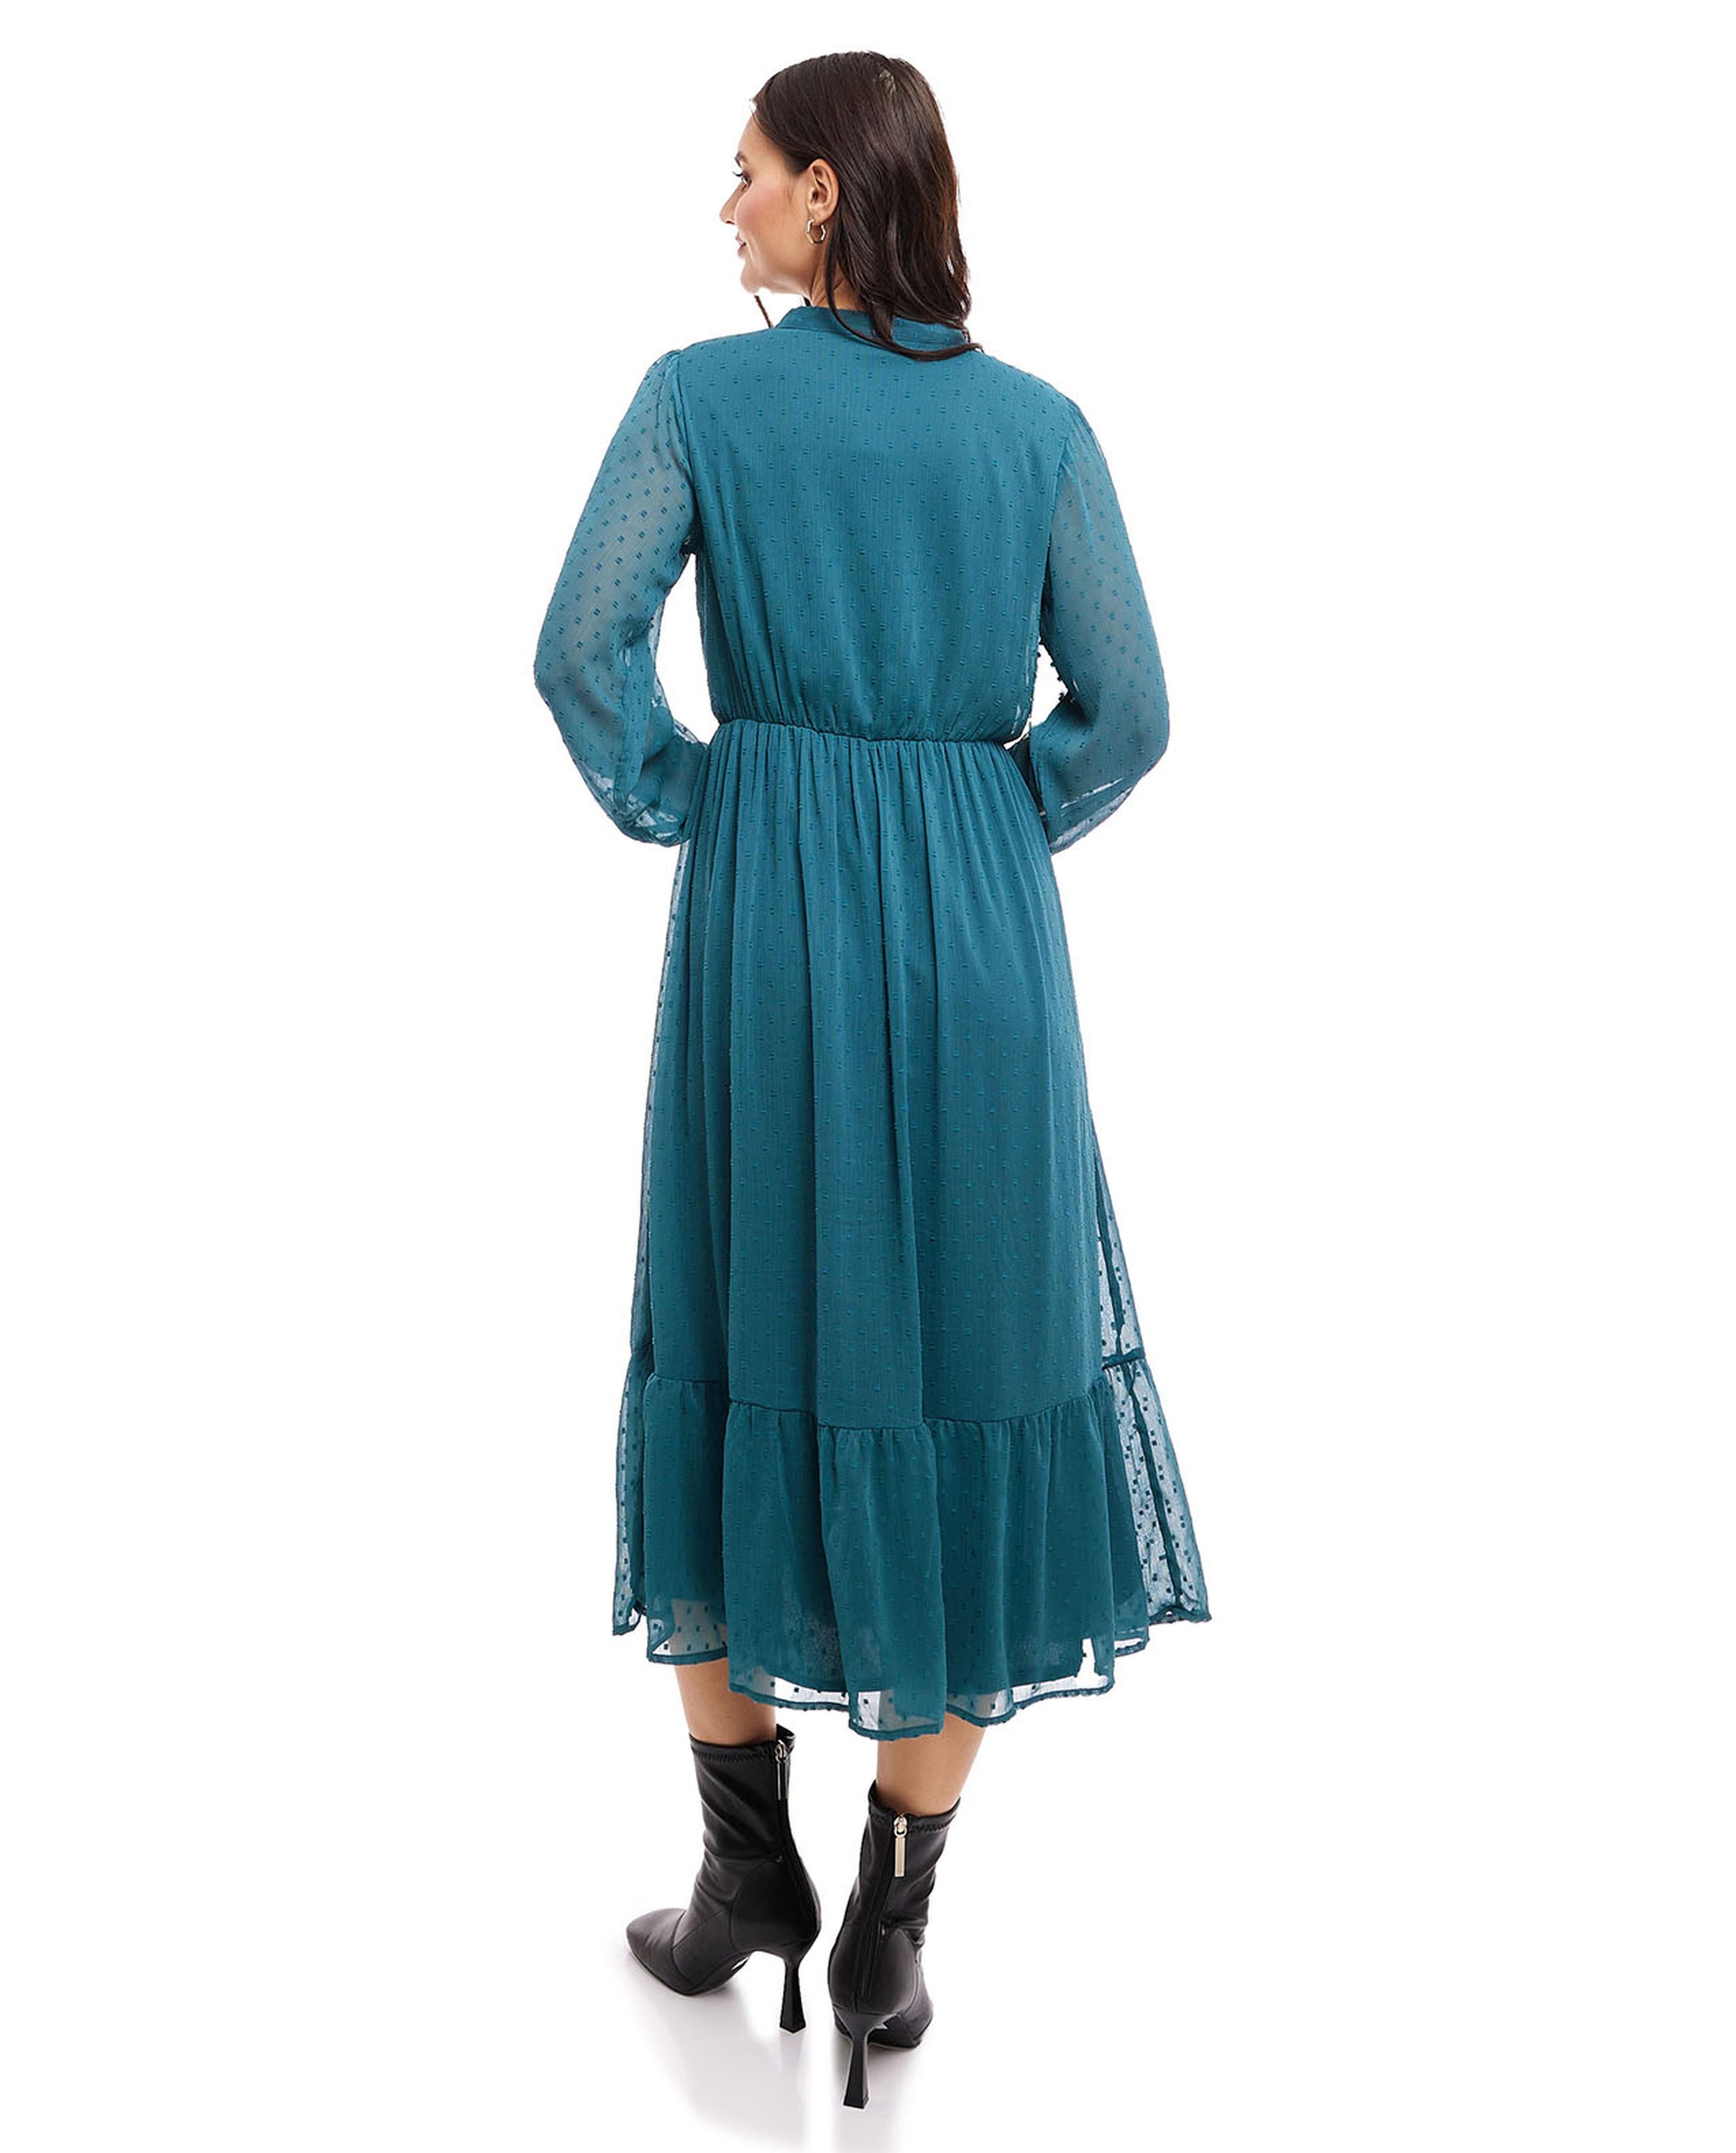 Woven Midi Dress with V-Neck and Long Sleeves